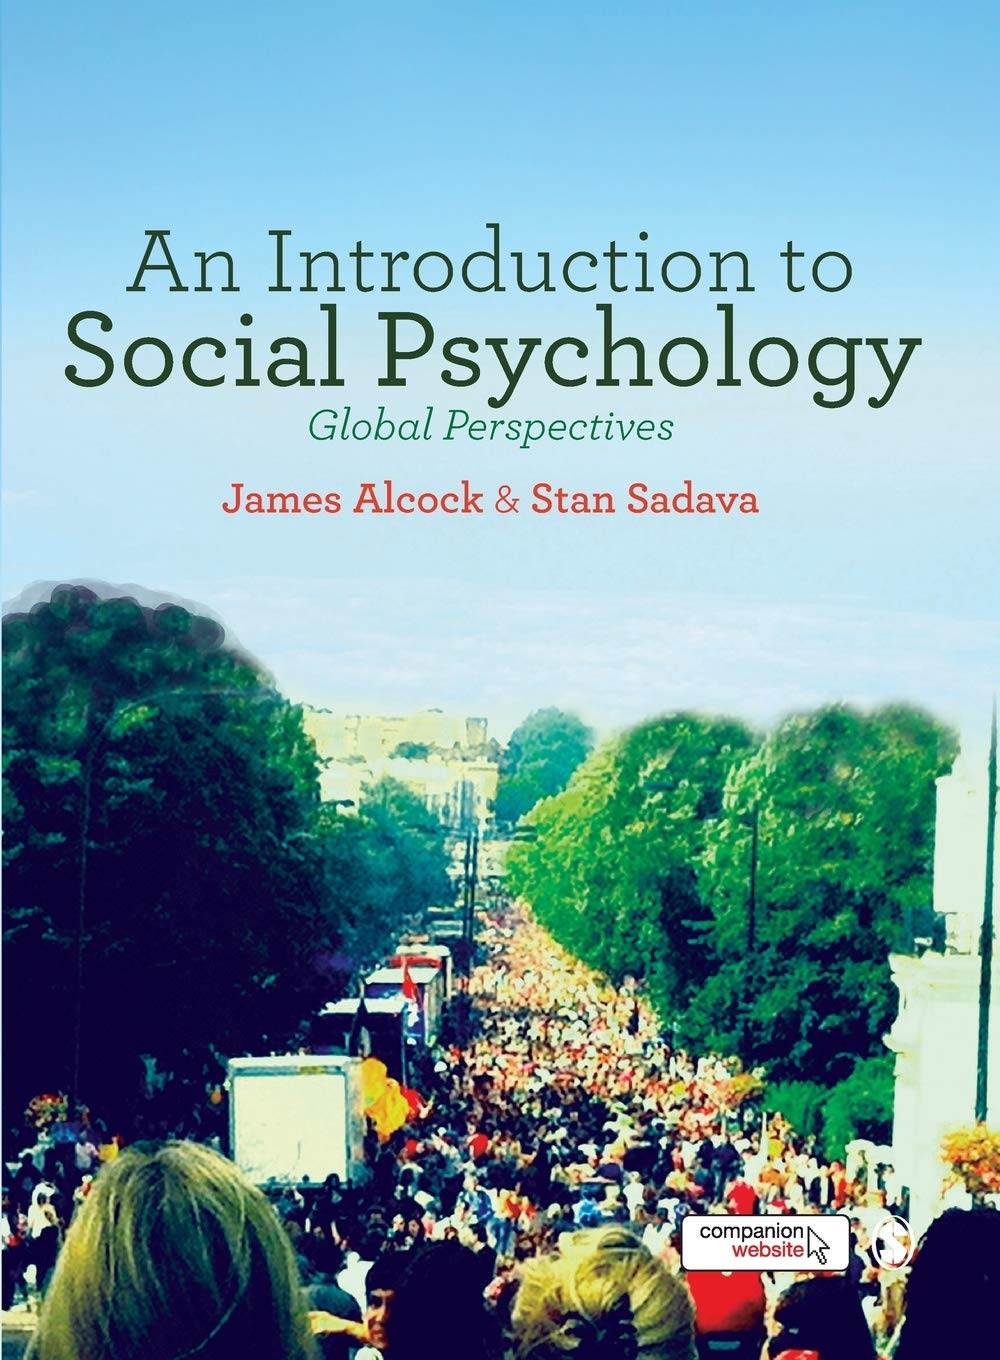 the official test bank questions to be used in conjunction with the textbook 'An Introduction to Social Psychology, by Alcock'